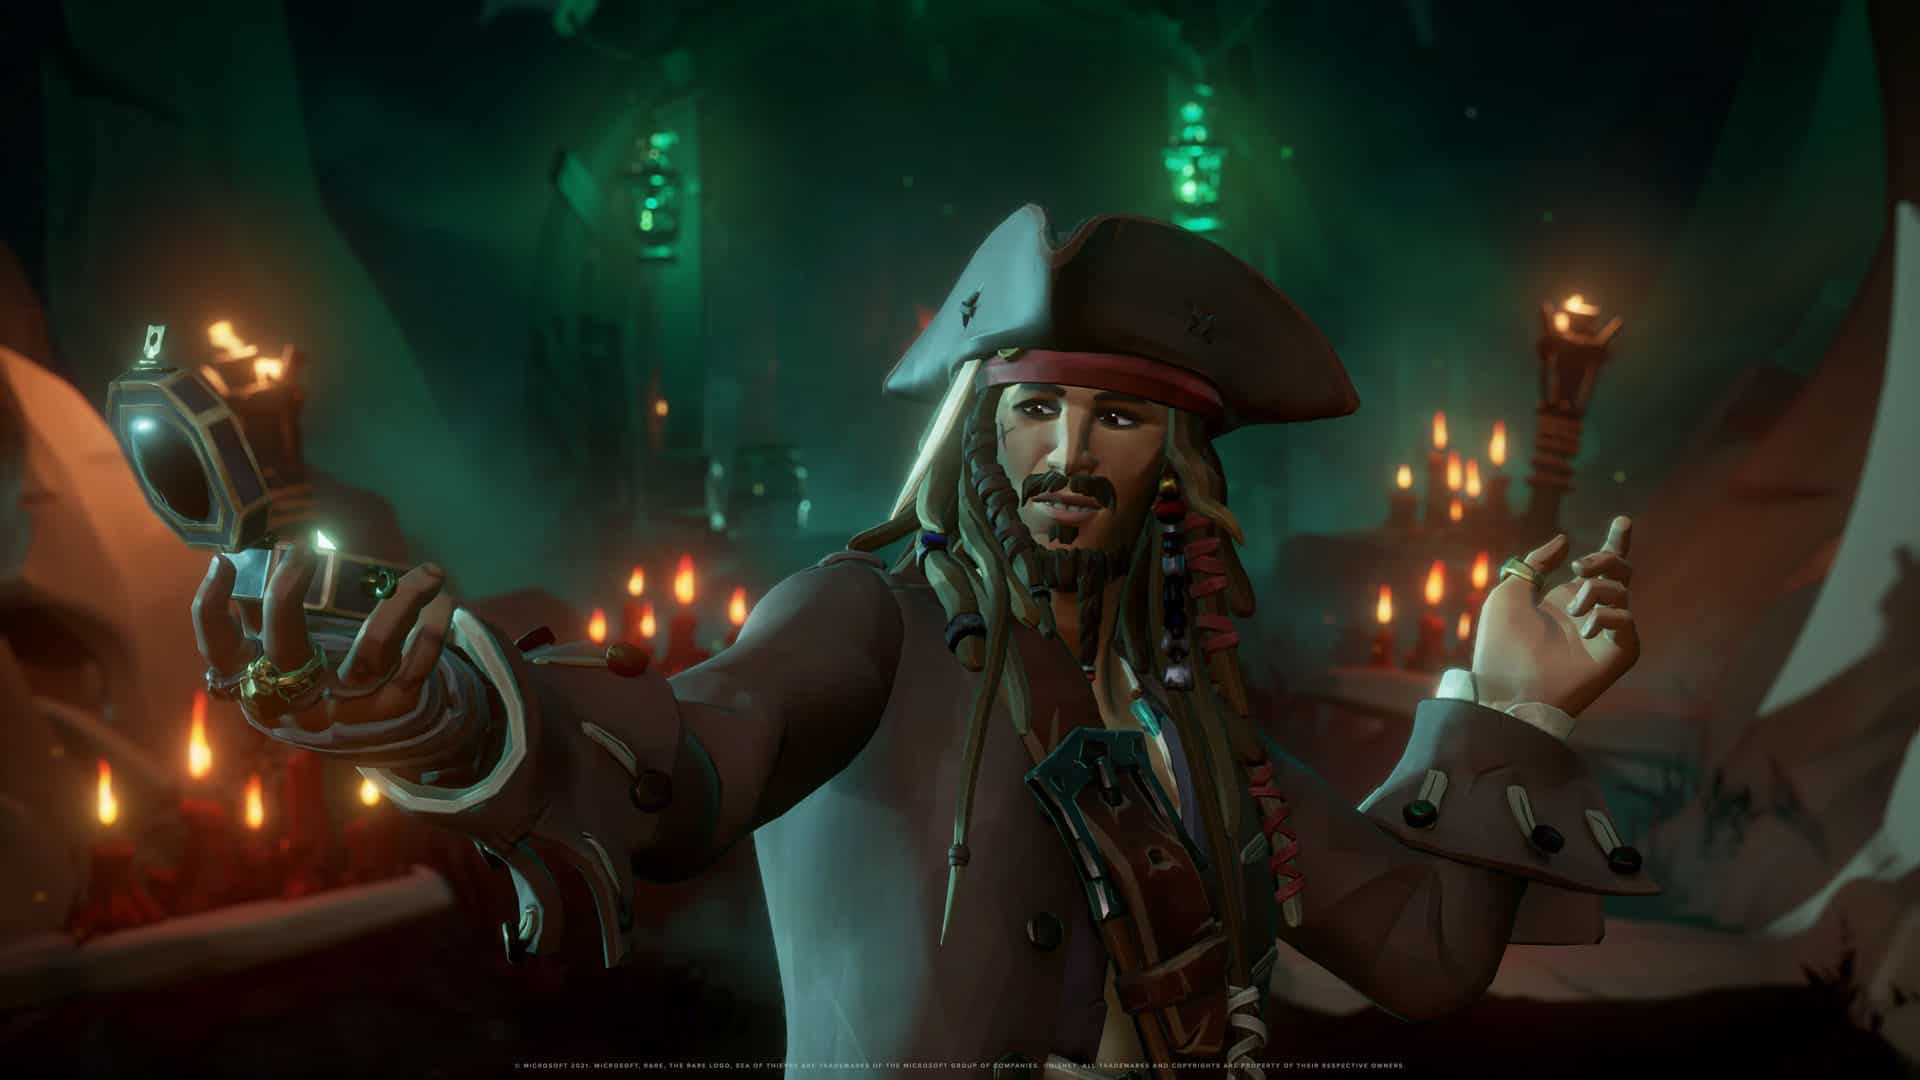 Sea of Thieves gets a Pirates of the Caribbean crossover next week